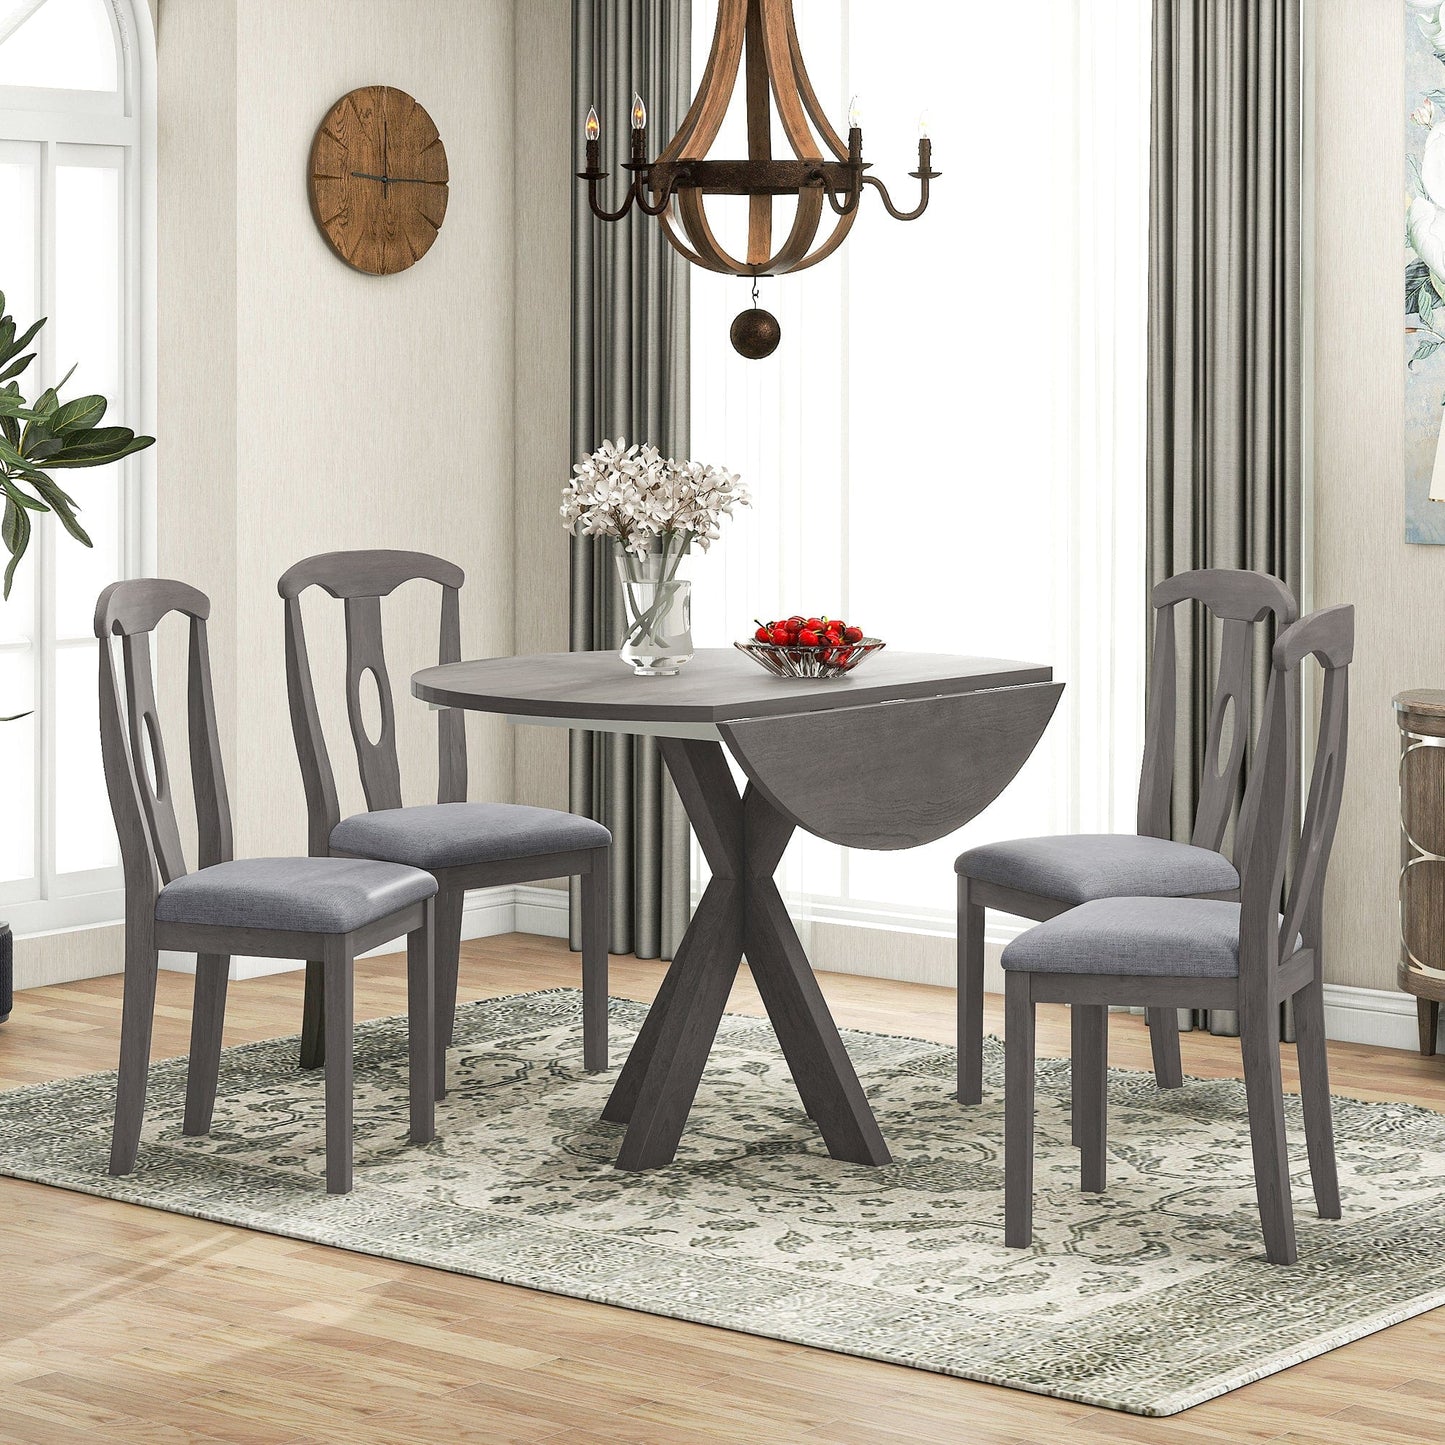 1st Choice Furniture Direct Dining Room Sets 1st Choice Rustic Grey Round Dining Table Set with 4 Padded Chairs